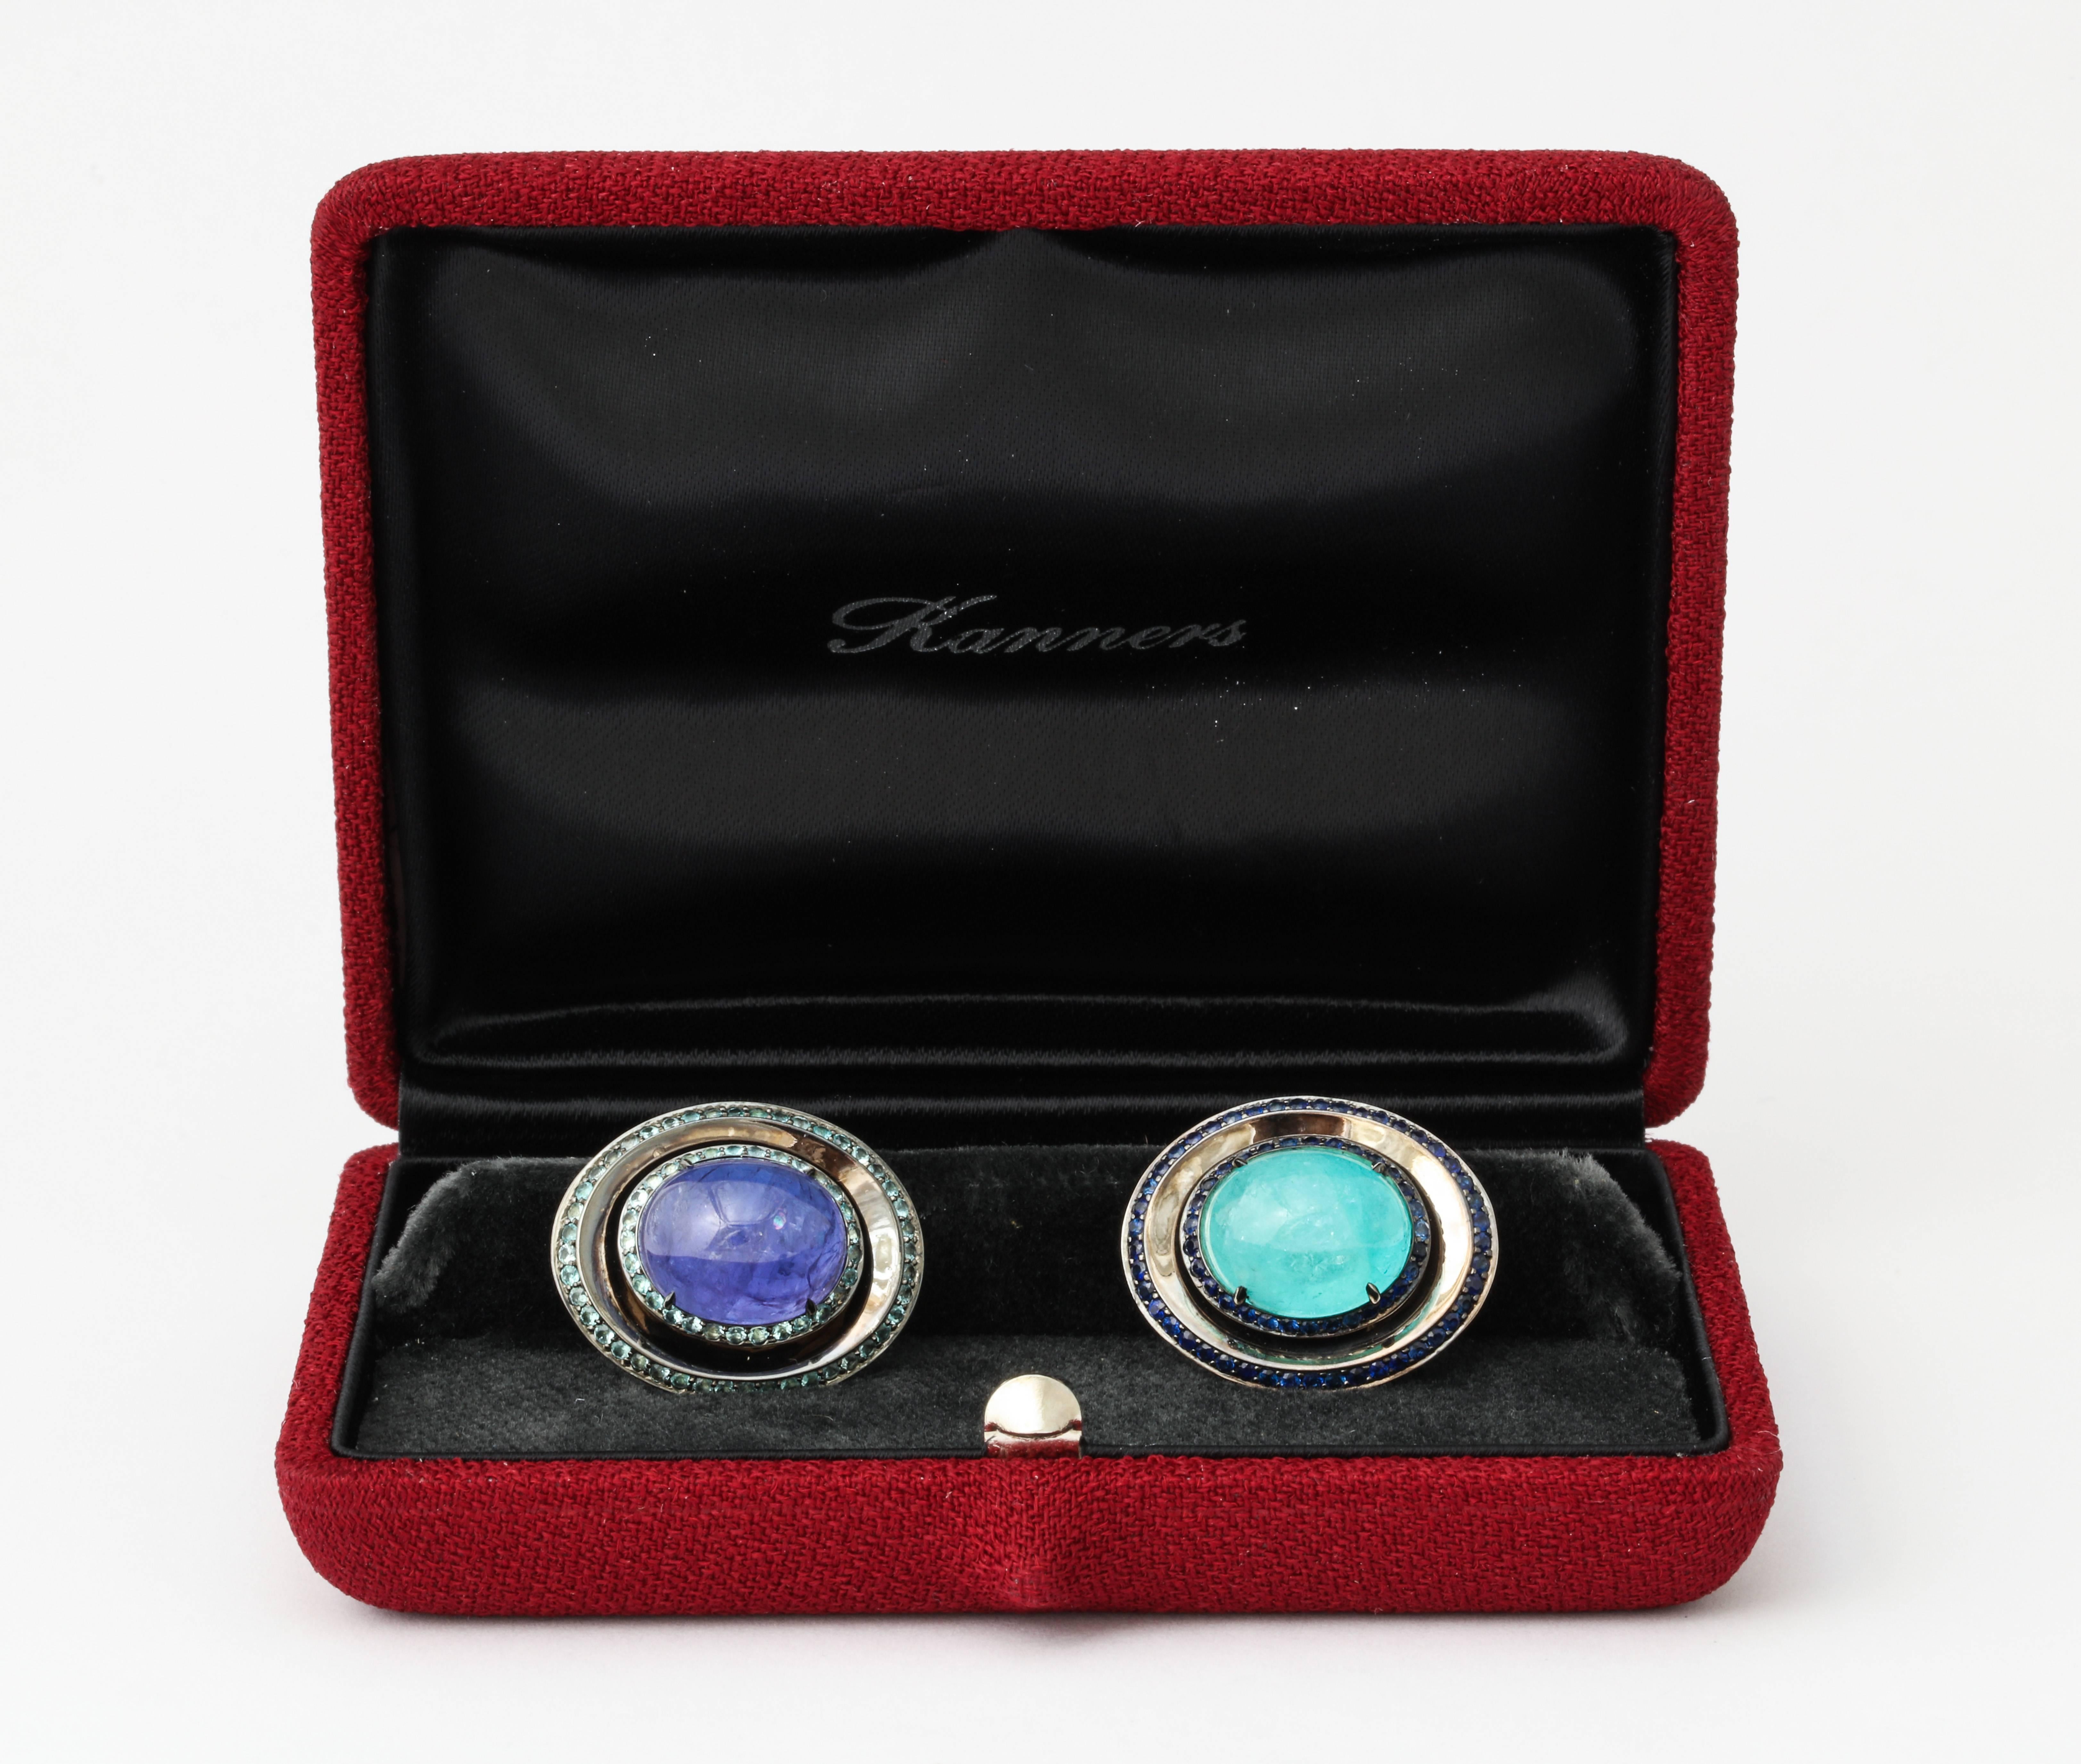 Uniquely sourced and cut to match stones, combined with meticulous craftsmanship- this is the true meaning of one of a kind, and these cufflinks are just that.  The center stones are a Brazilian Paraiba tourmaline weighing  7.54cts and a Tanzanite